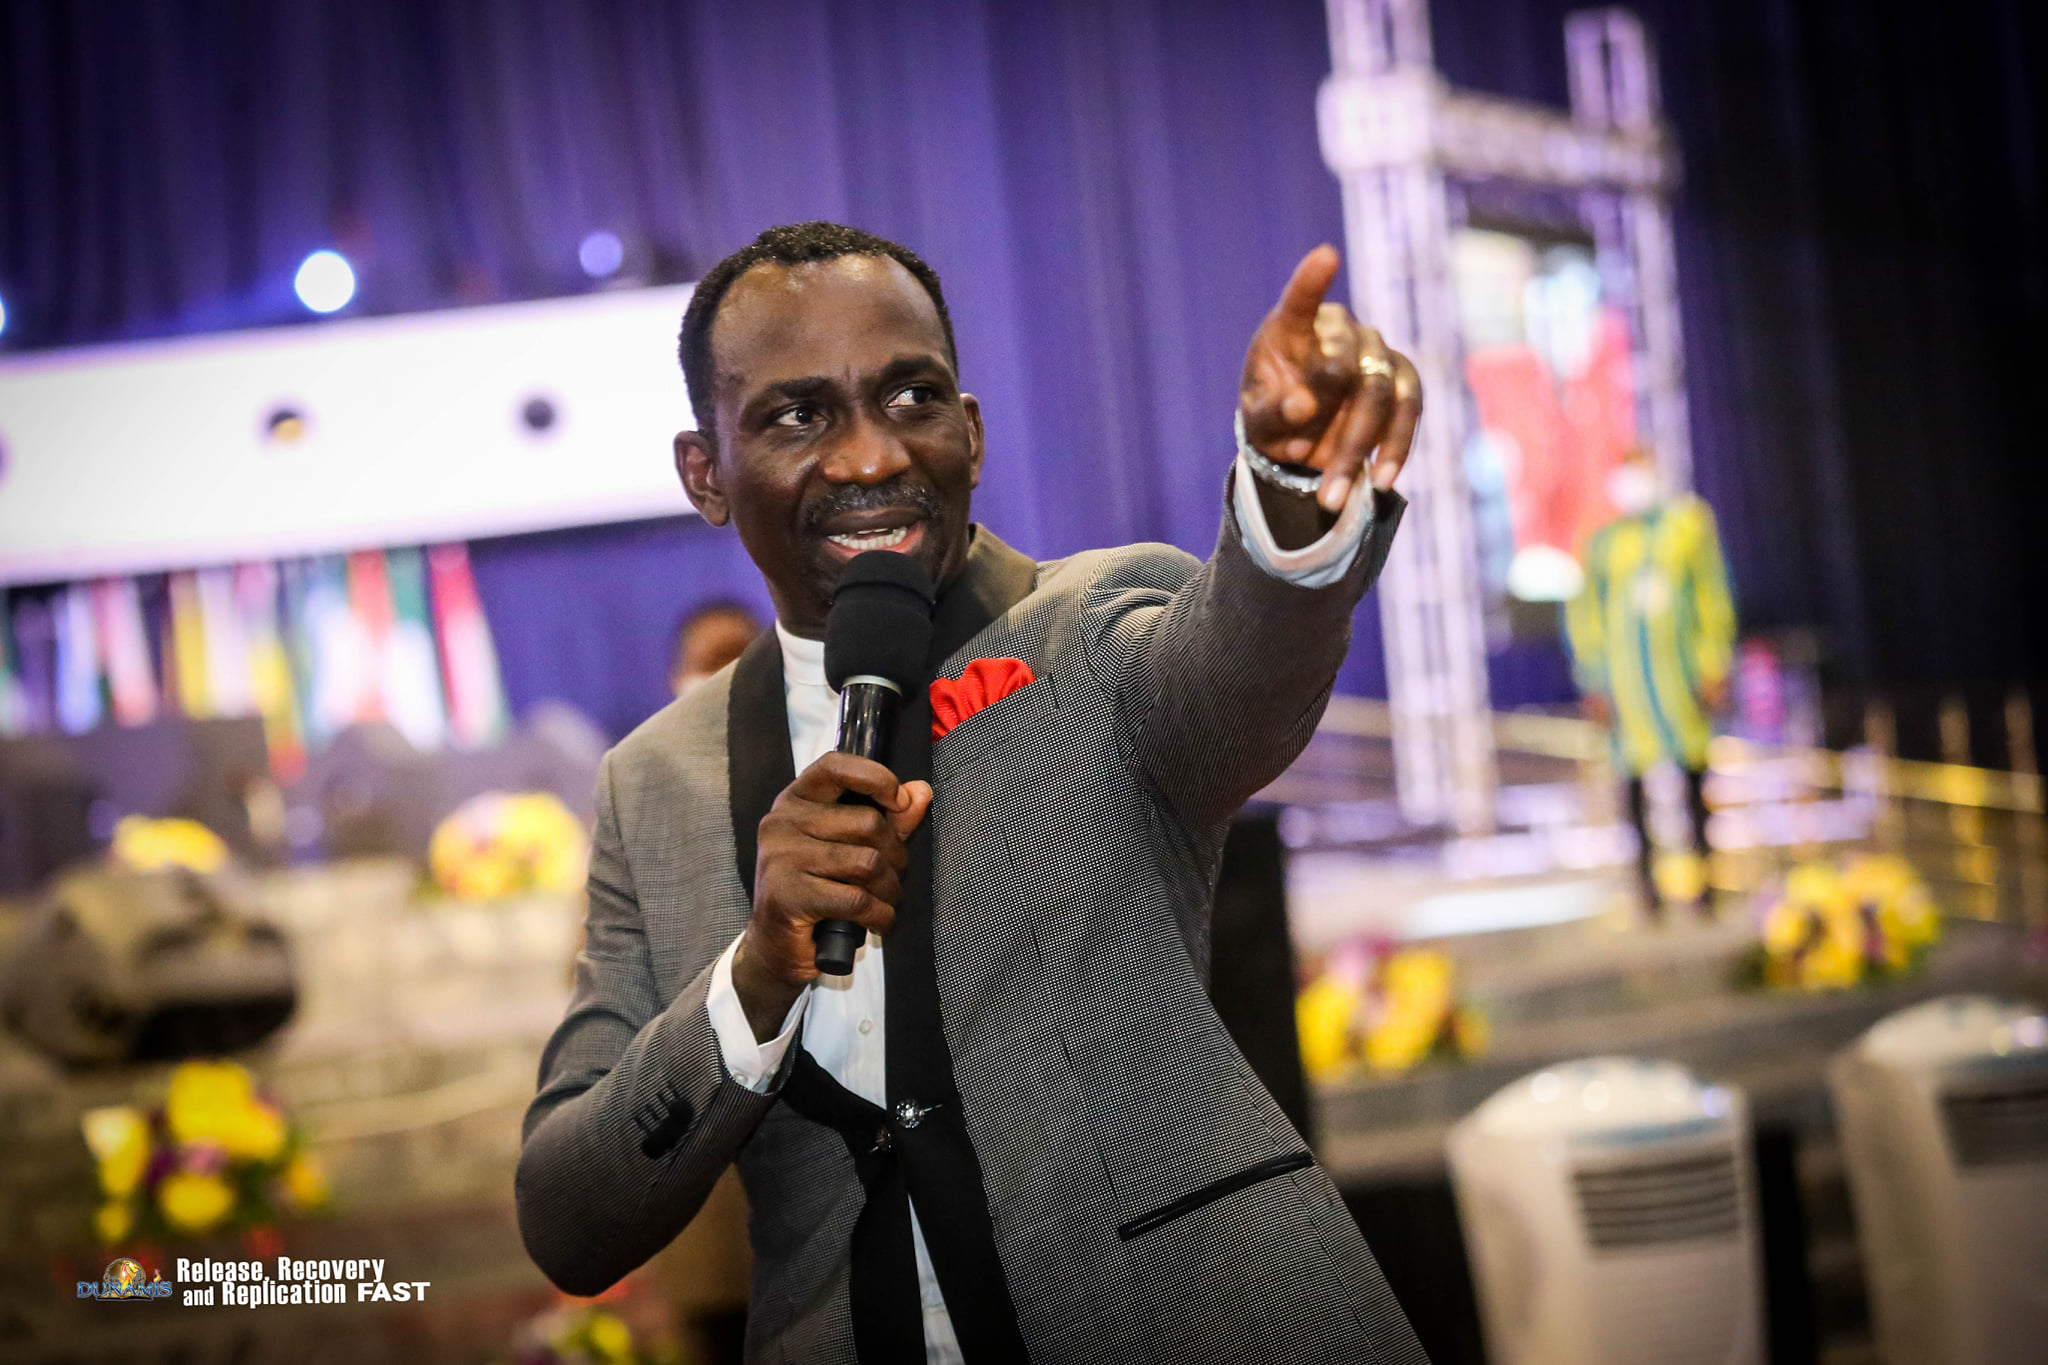 Download SHILOH 2020 - Turnaround Encounter - DAY 4.1 Hour Of Visitation with Pastor Paul Enenche.mp3